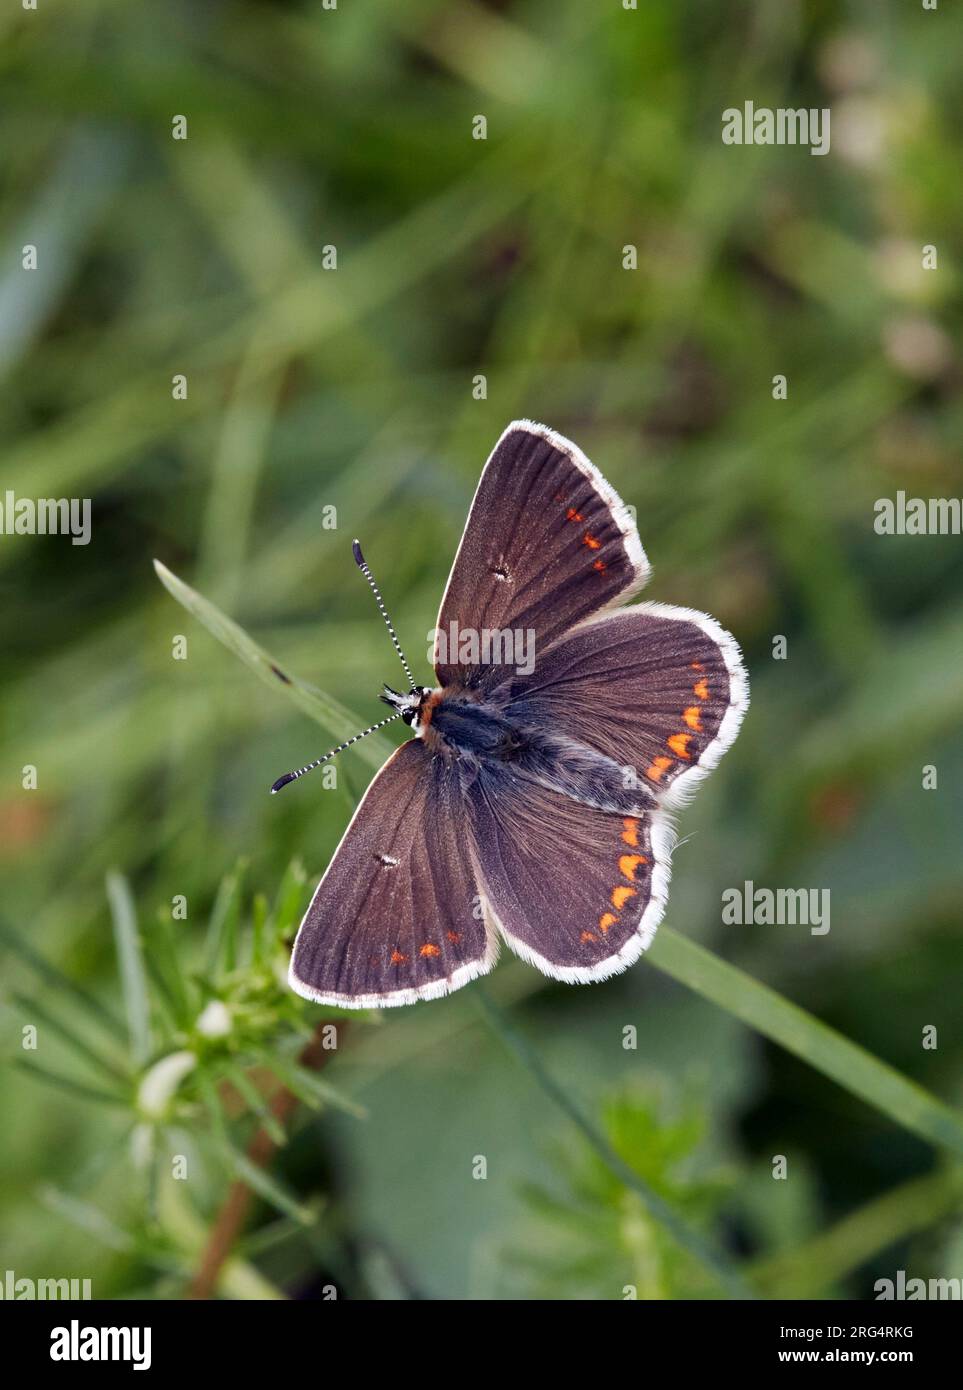 Northern Brown Argus. Latterbarrow Nature Reserve, Witherslack, Cumbria, England. Stock Photo